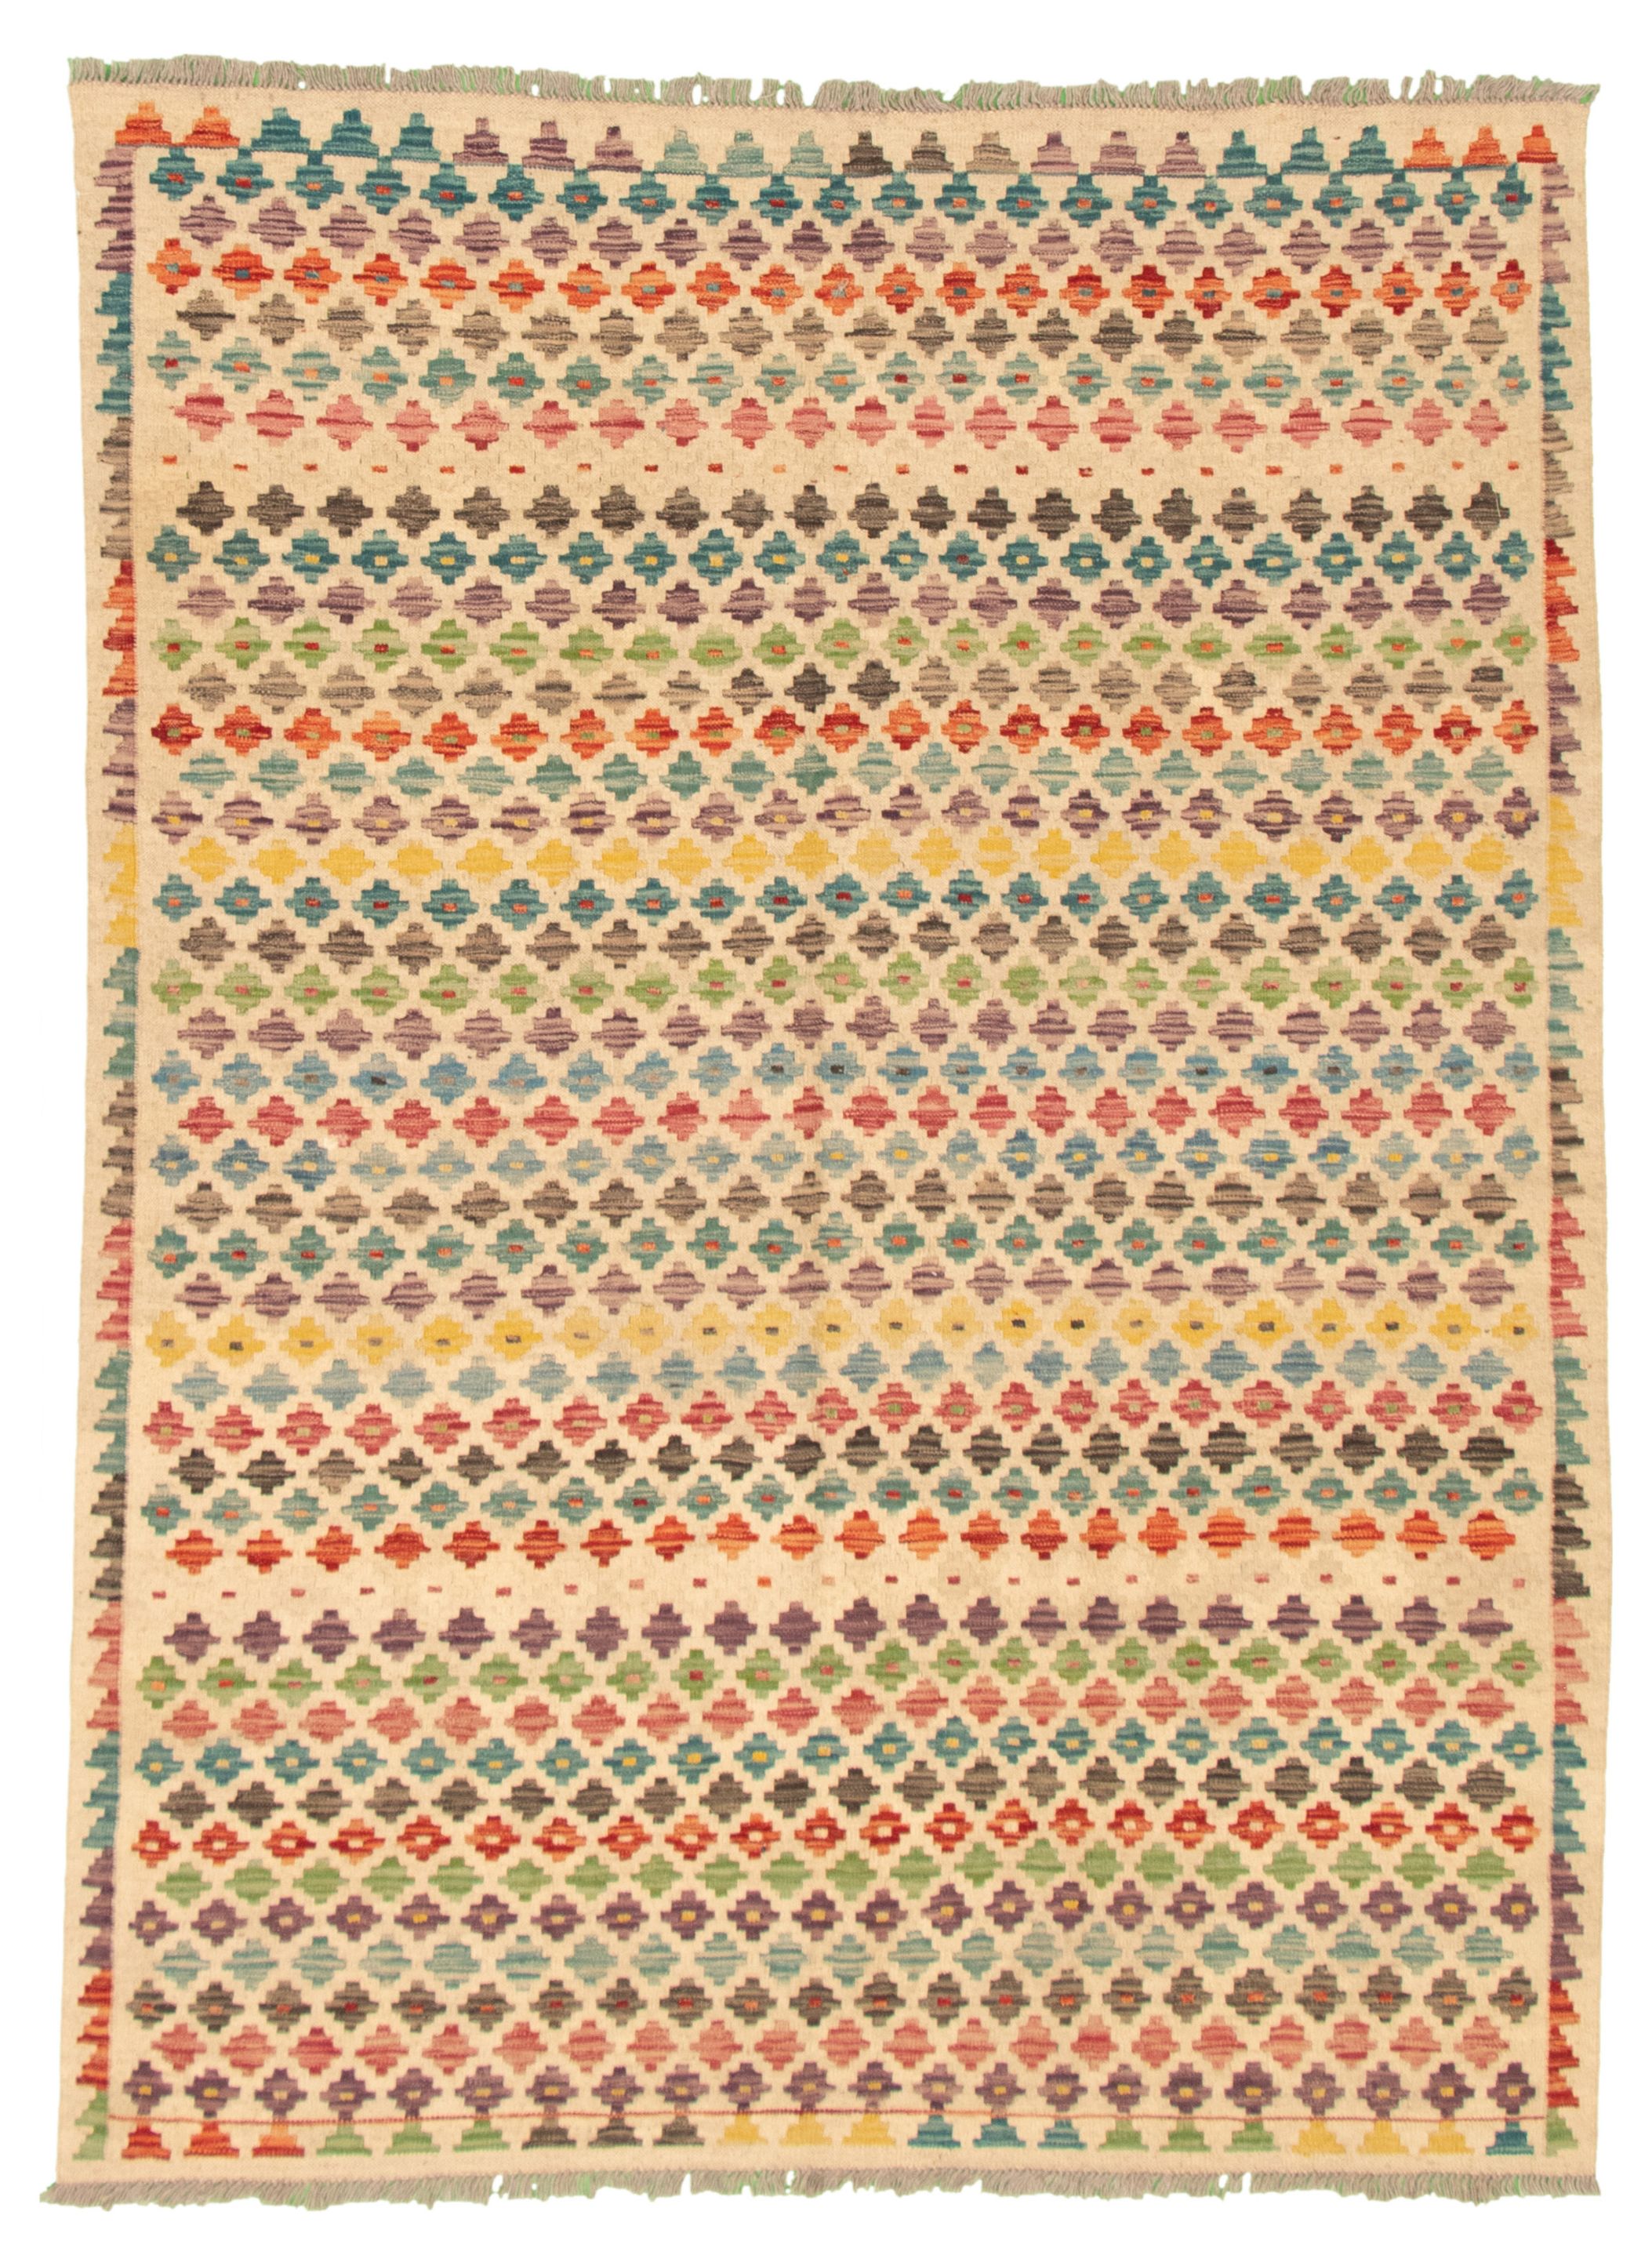 Hand woven Bold and Colorful  Ivory Wool Kilim 5'9" x 7'10" Size: 5'9" x 7'10"  